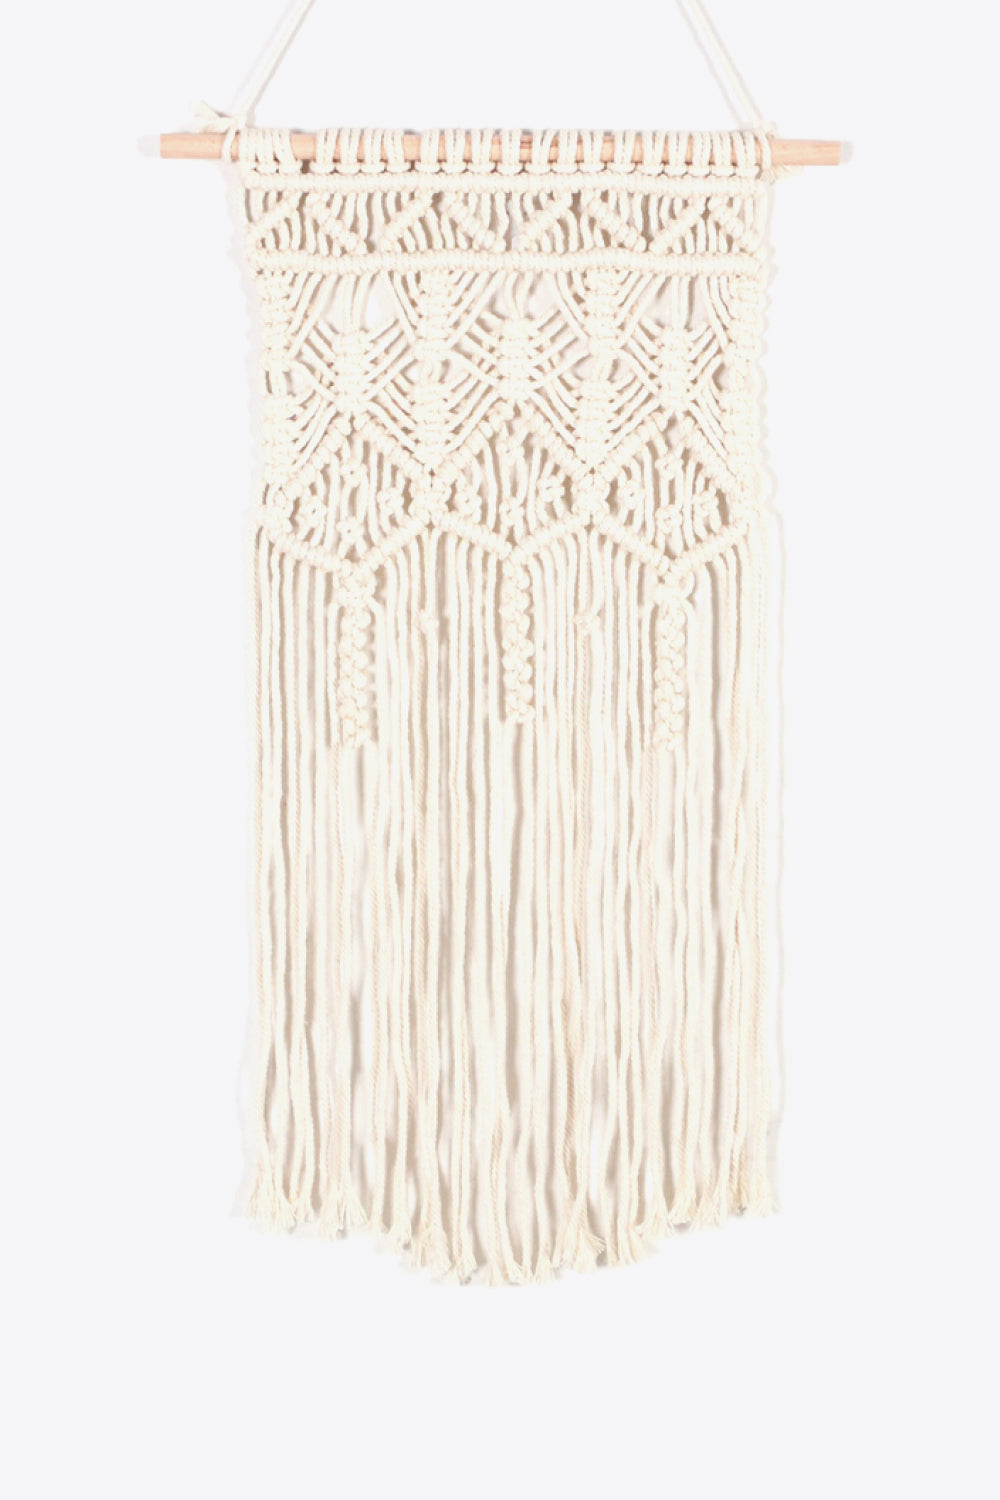 Macrame Bohemian Hand Woven Fringe Wall Hanging - Online Only